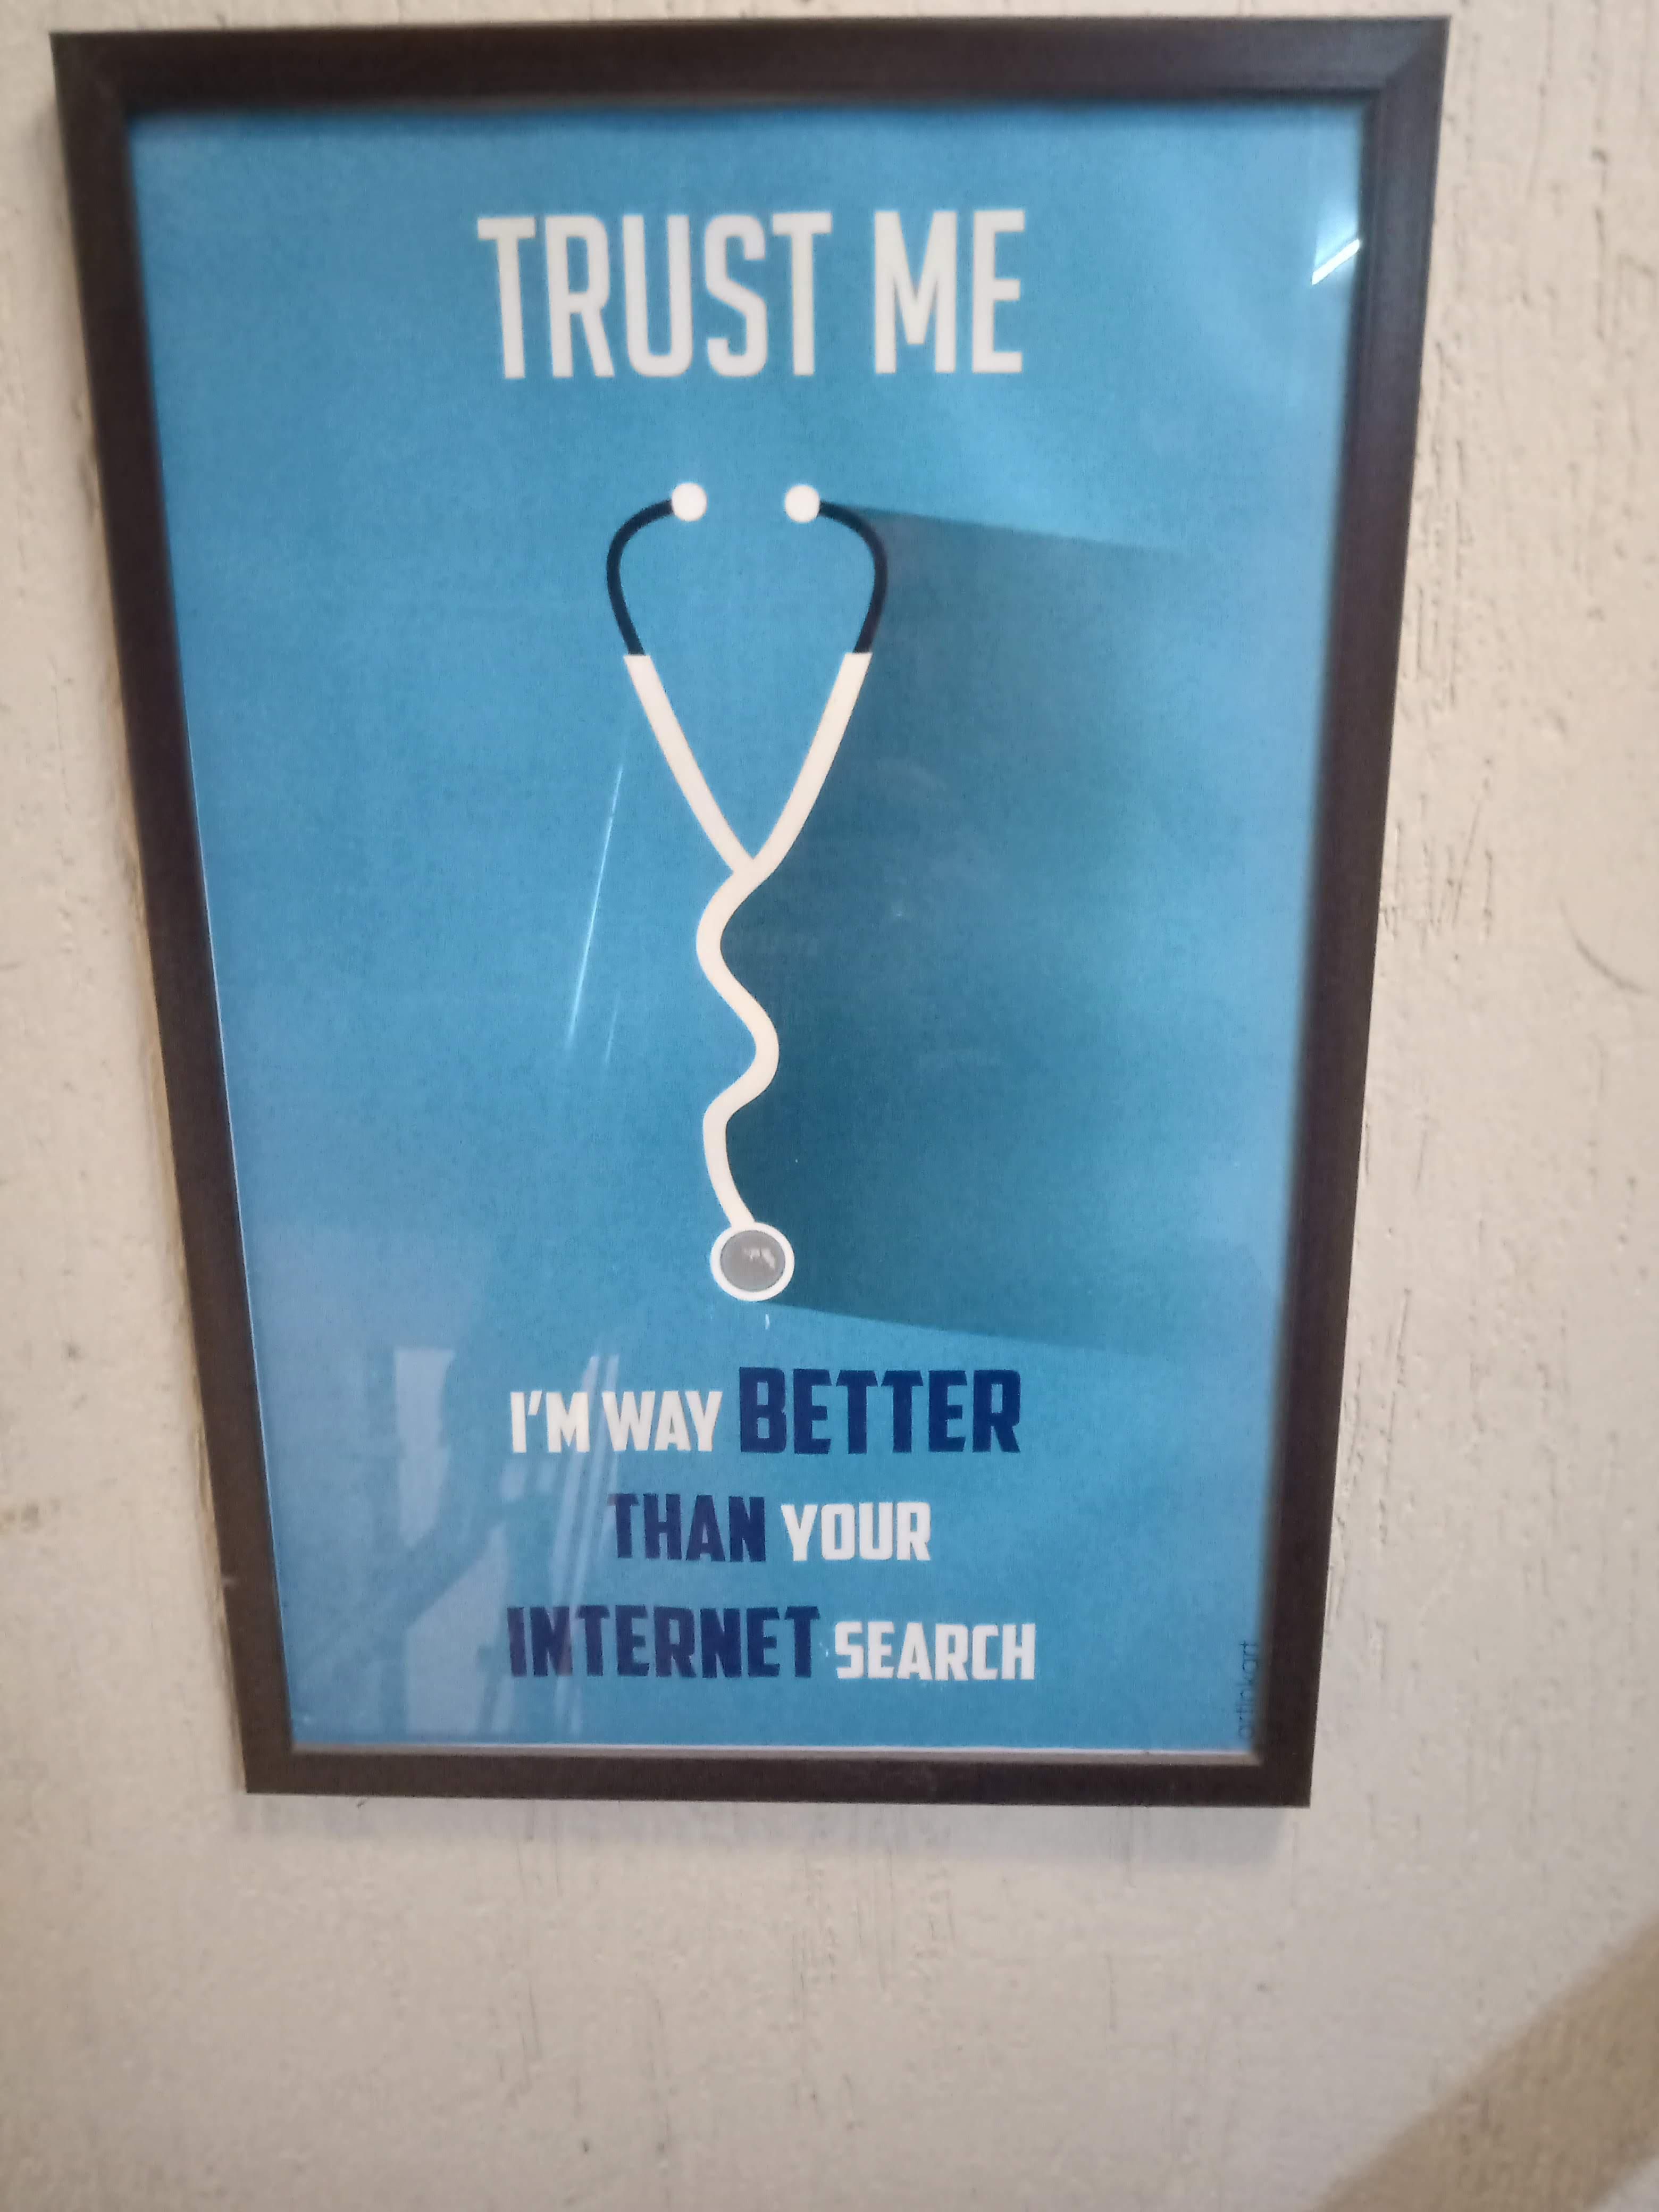 Saw this in the clinic today.